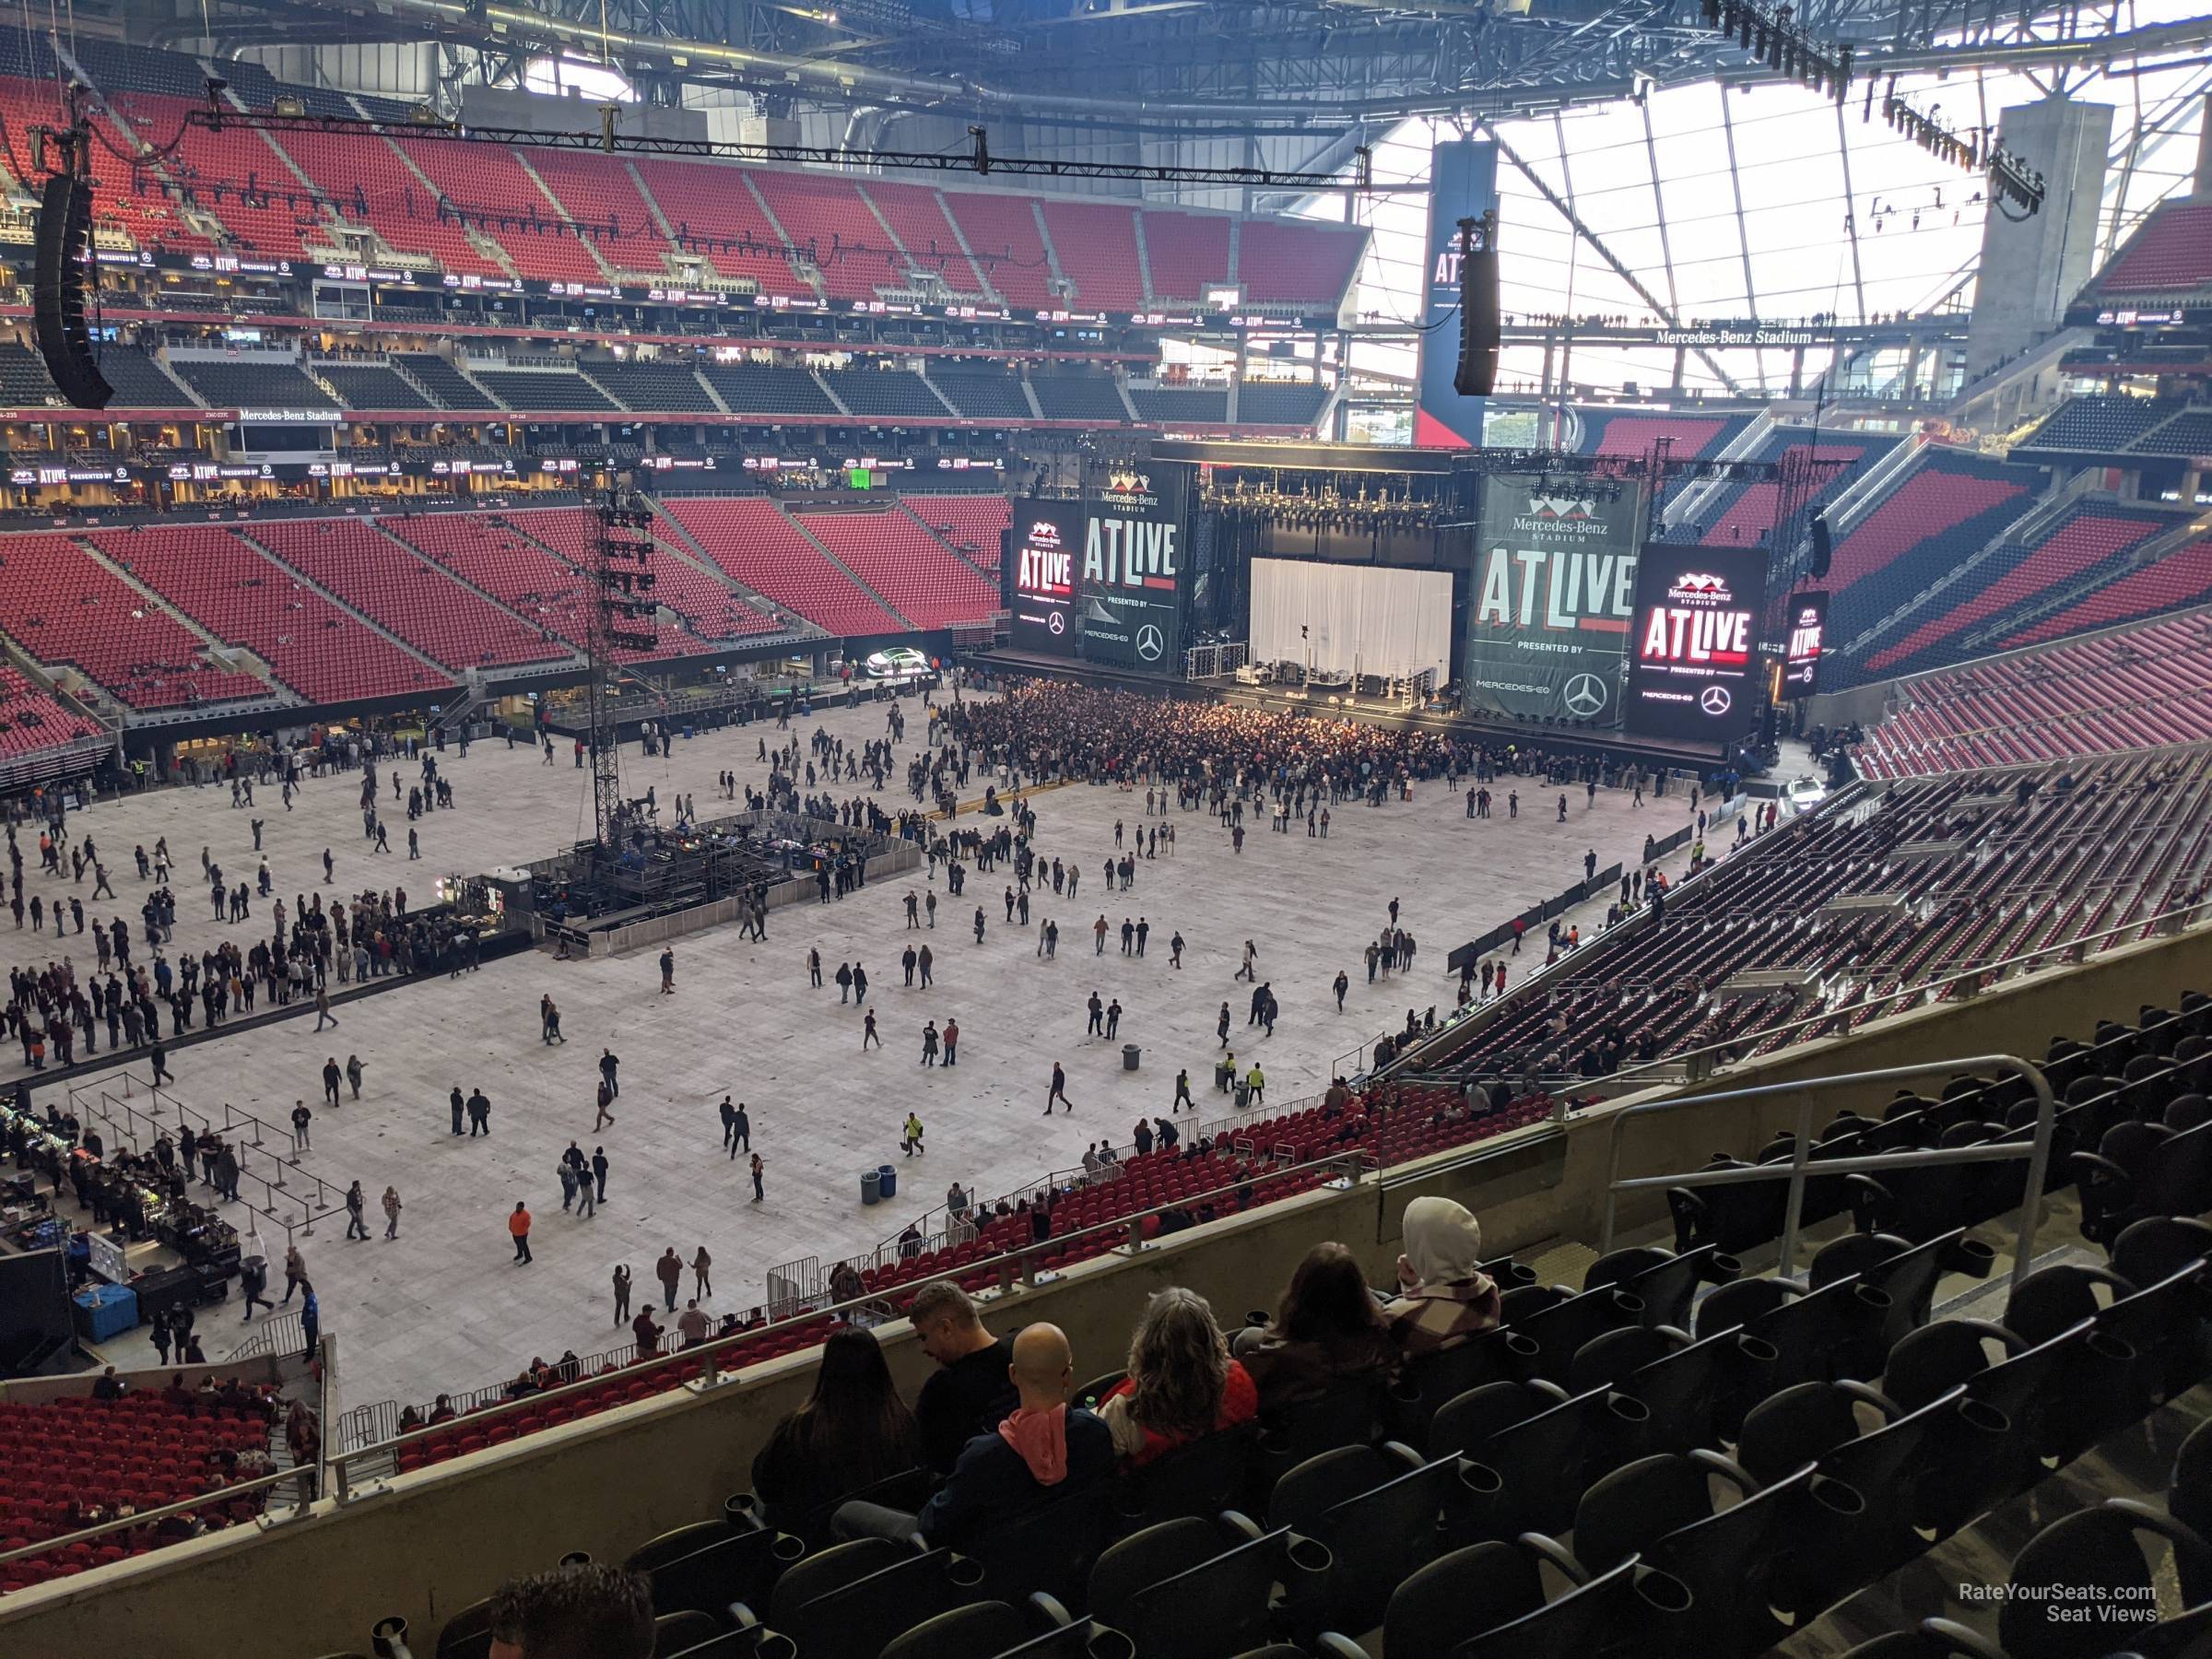 section 218, row 5 seat view  for concert - mercedes-benz stadium